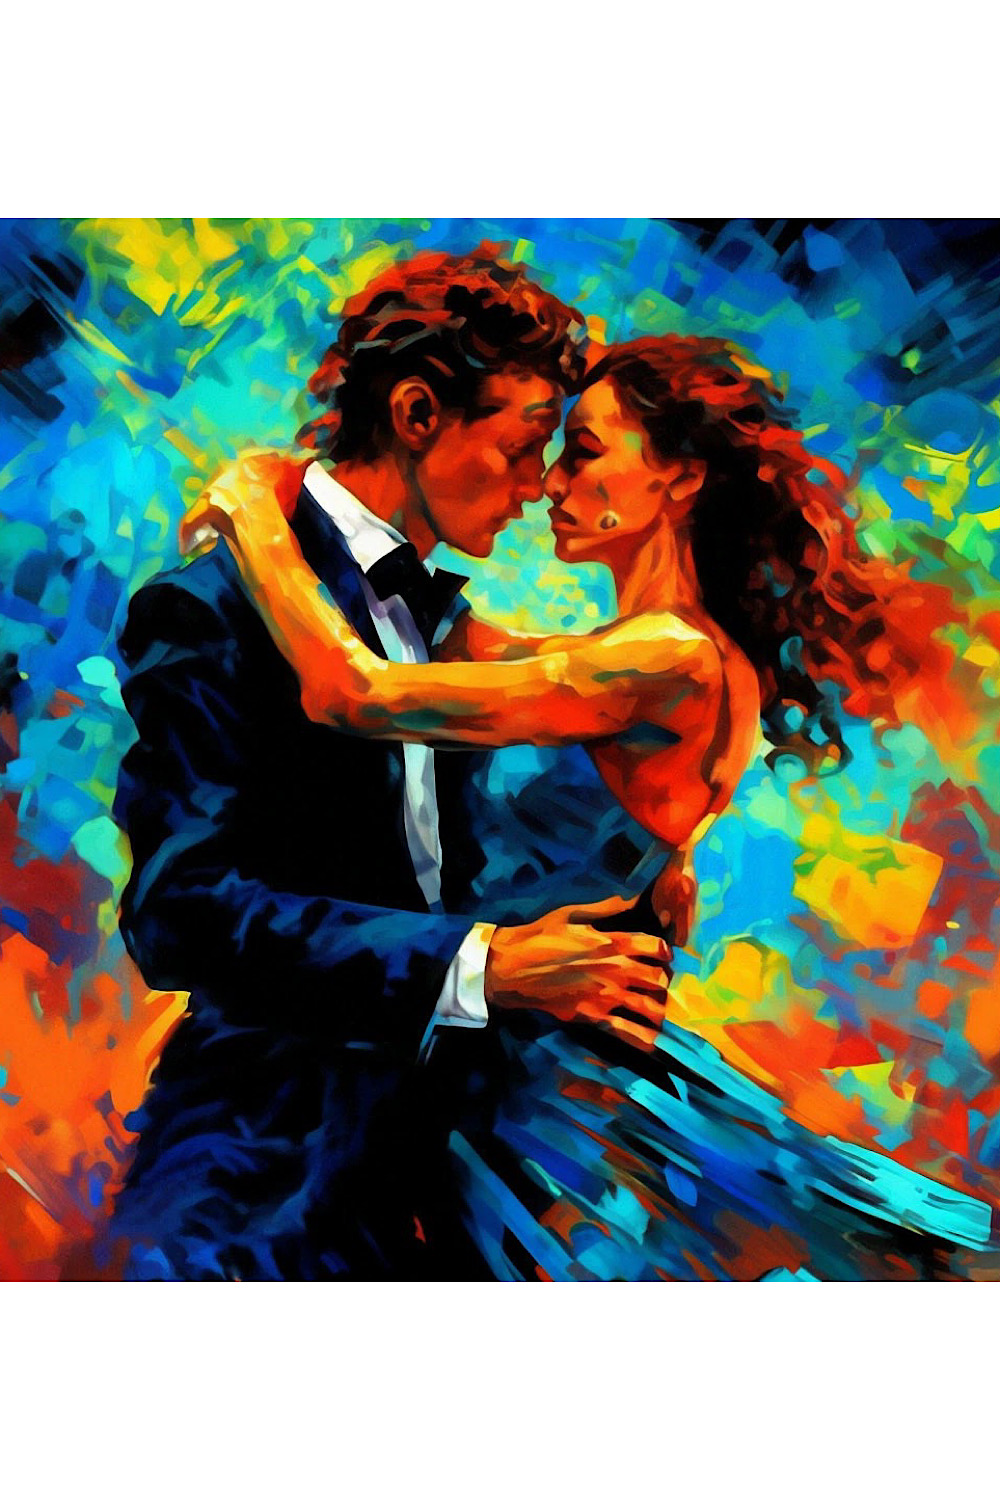 Oil painting "Tango" in Van Gogh style pinterest preview image.